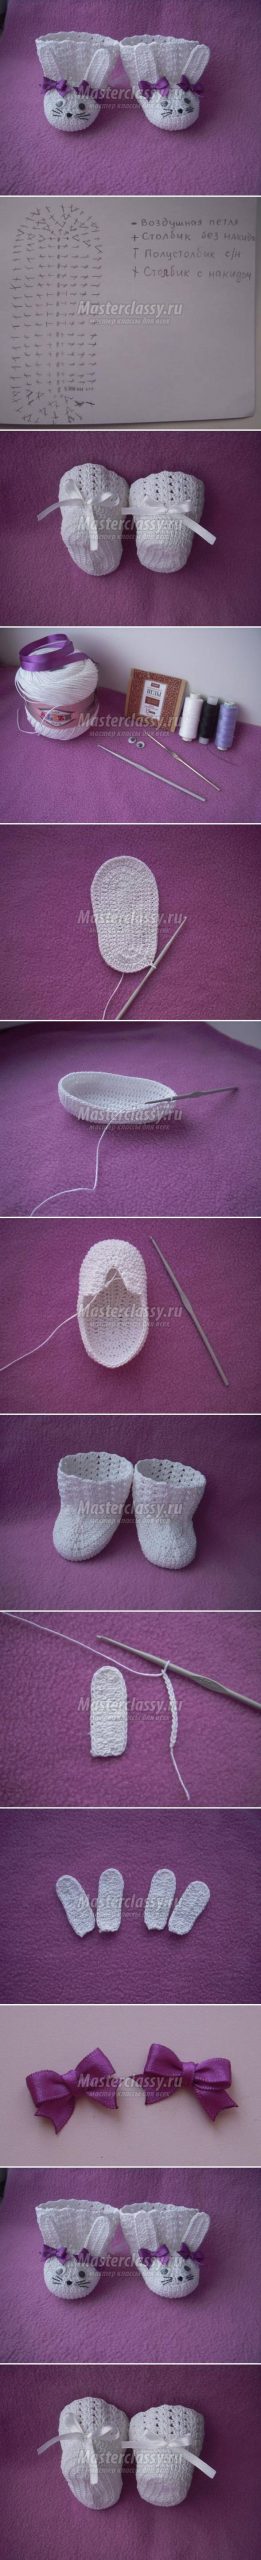 how to make crochet bunny baby shoes